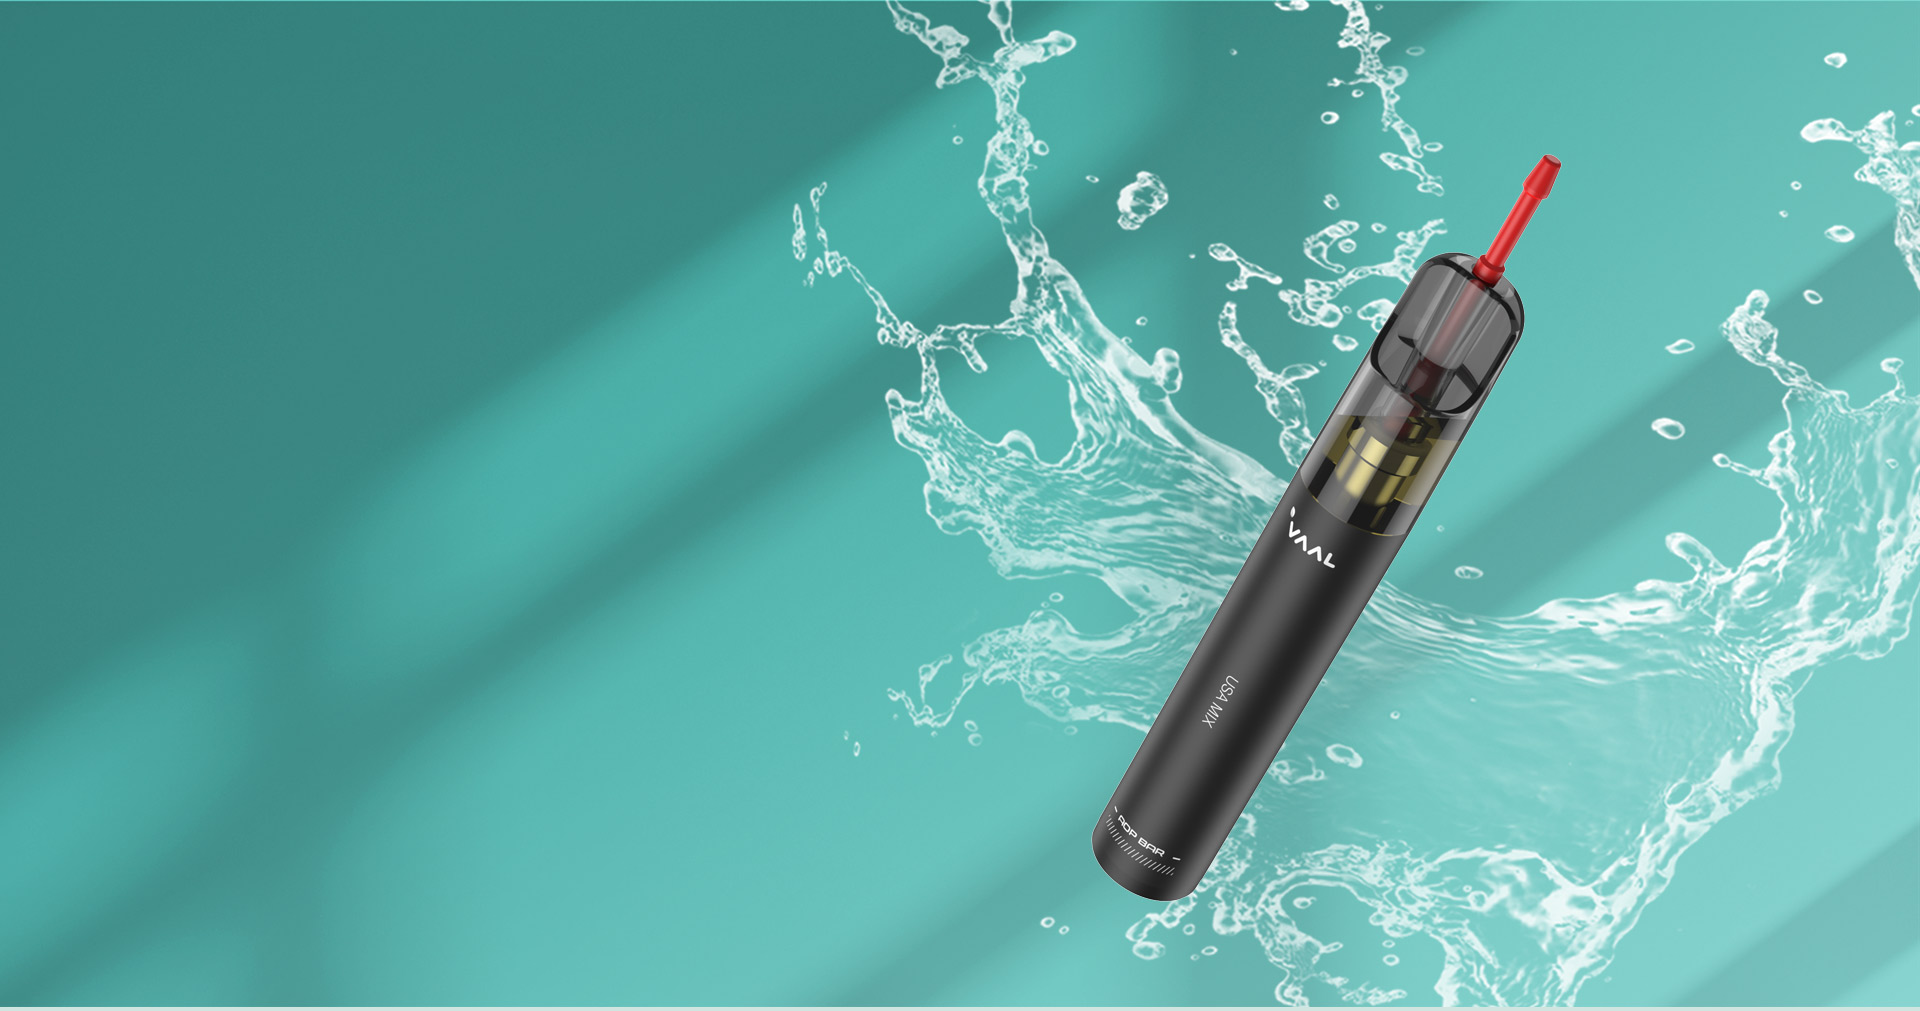 The VAAL AOP Bar uses AOP technology to prevent leakage and maximize puffs from limited e-liquid capacity. It offers stable and excellent taste, surpassing regular disposables. Instant gratification is just a plug-pull away.